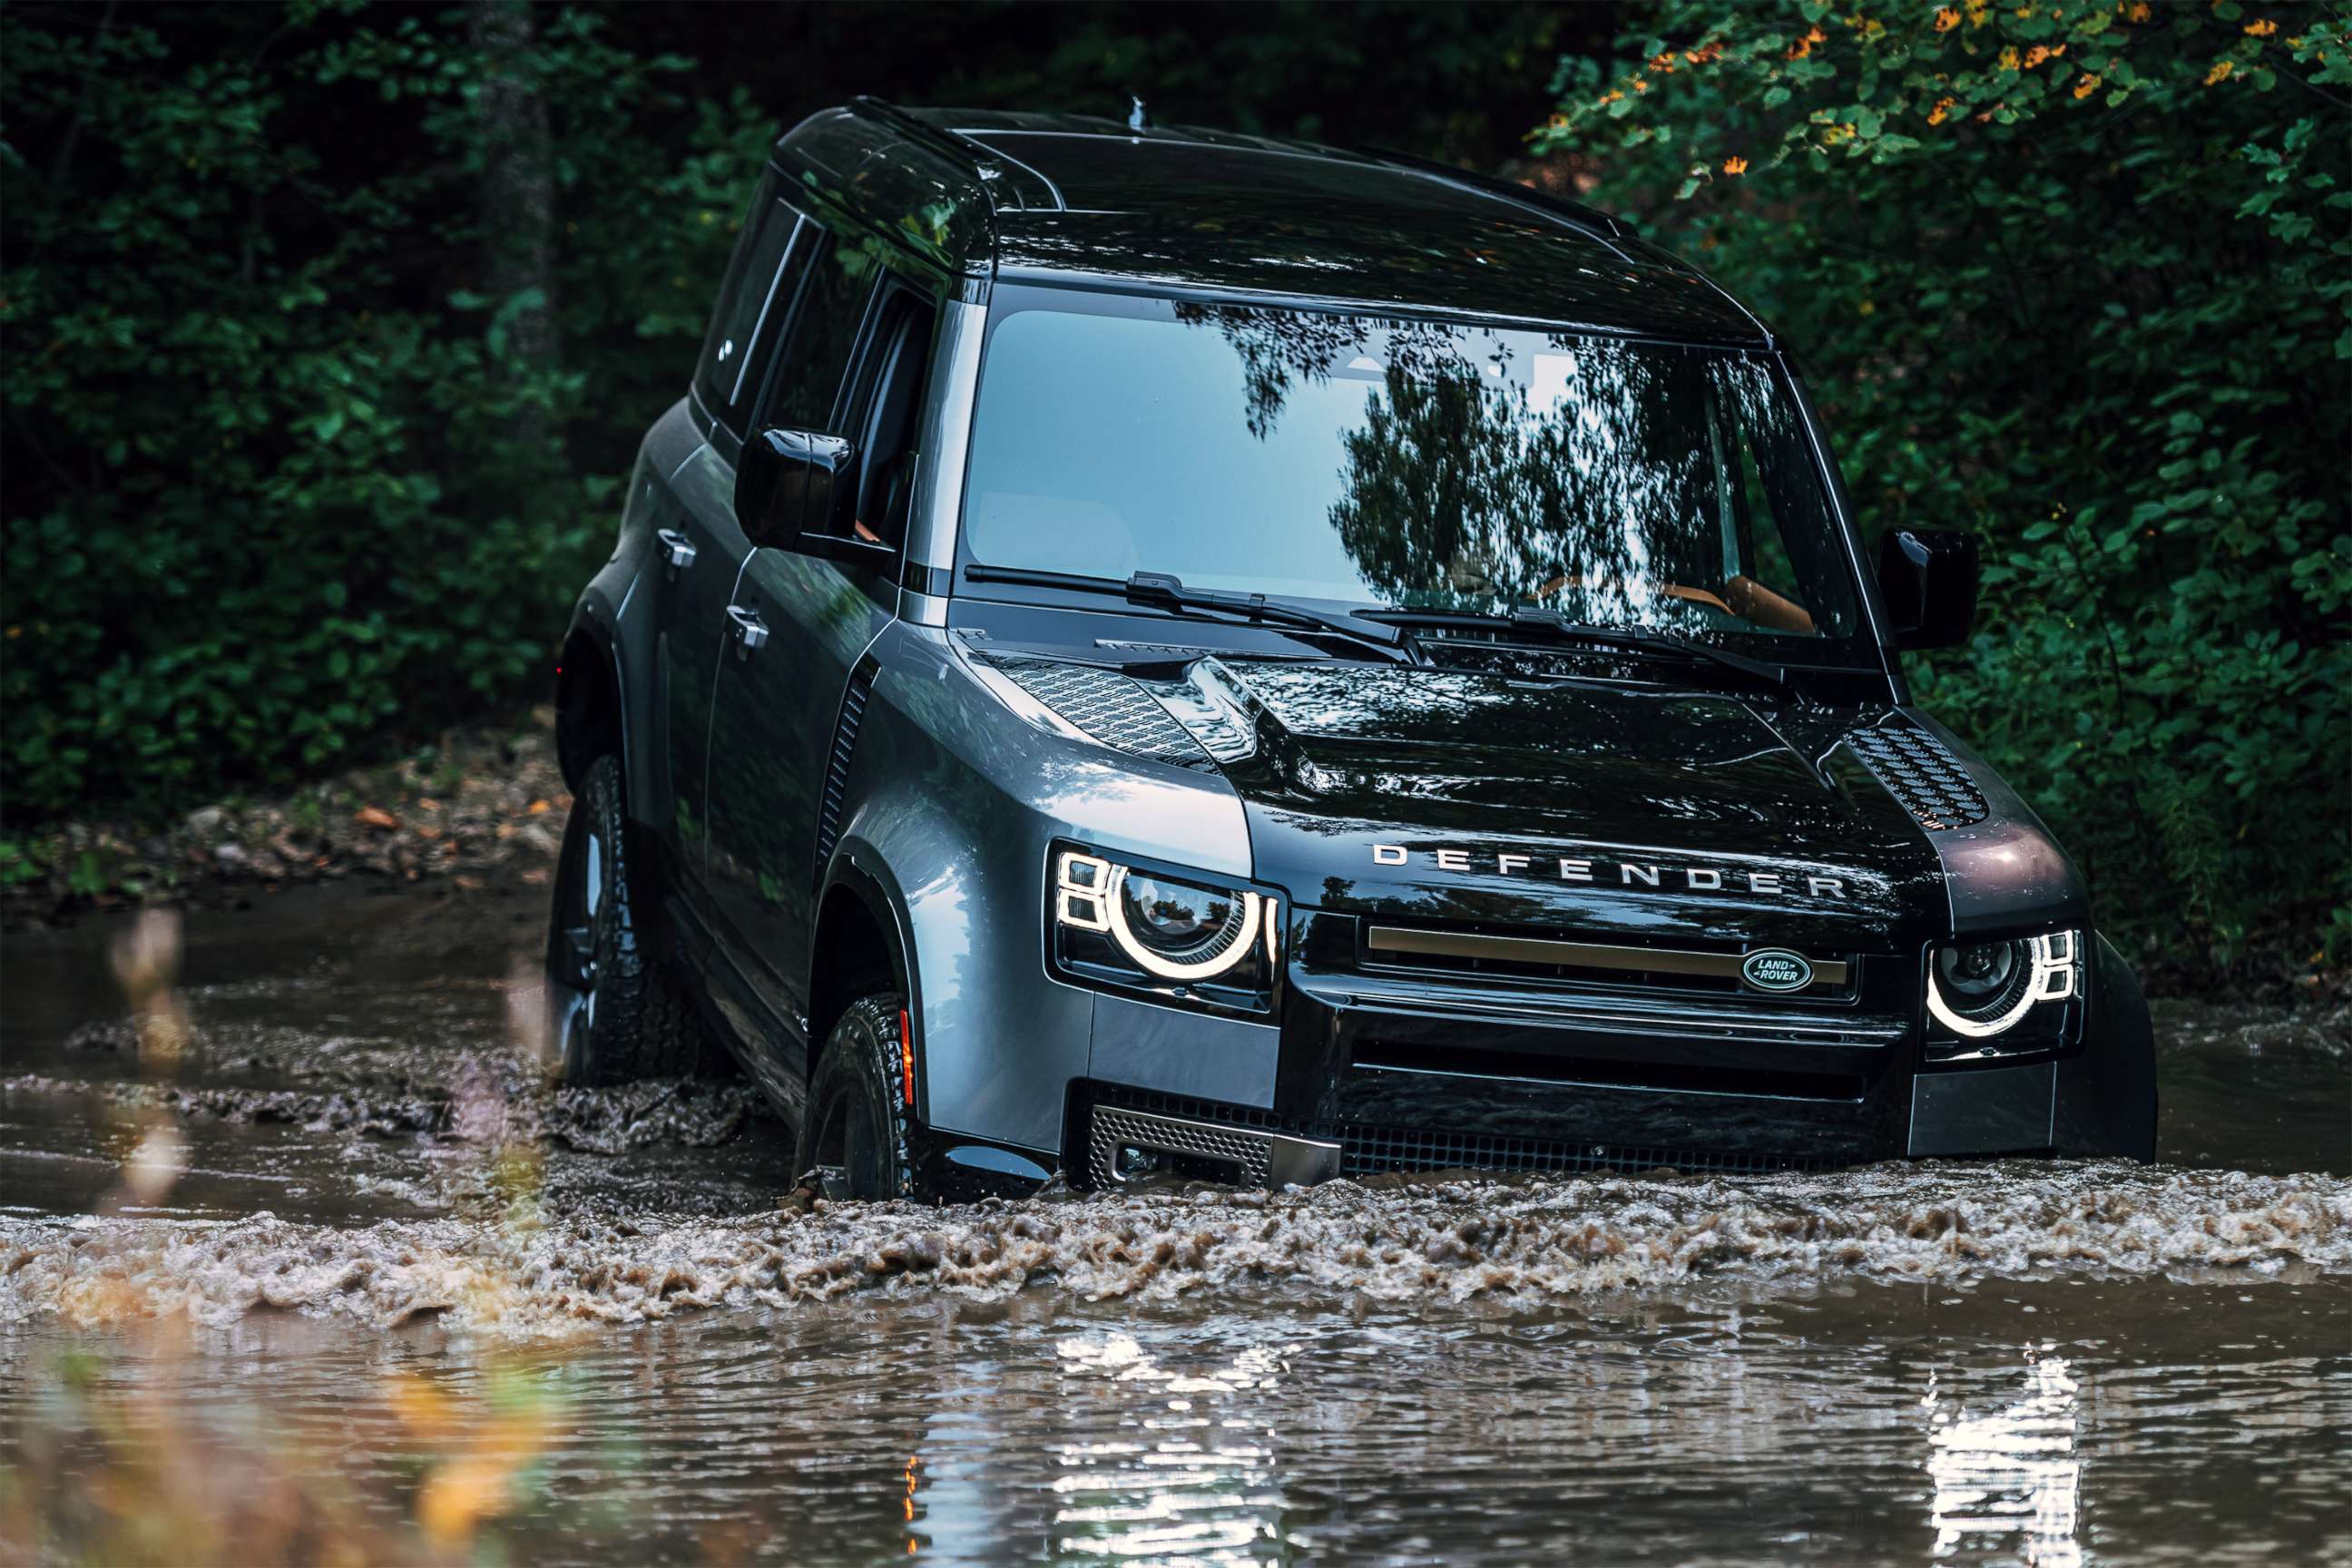 PHOTO: The Defender has a rich heritage in off-roading and the current model takes cues from its predecessors.